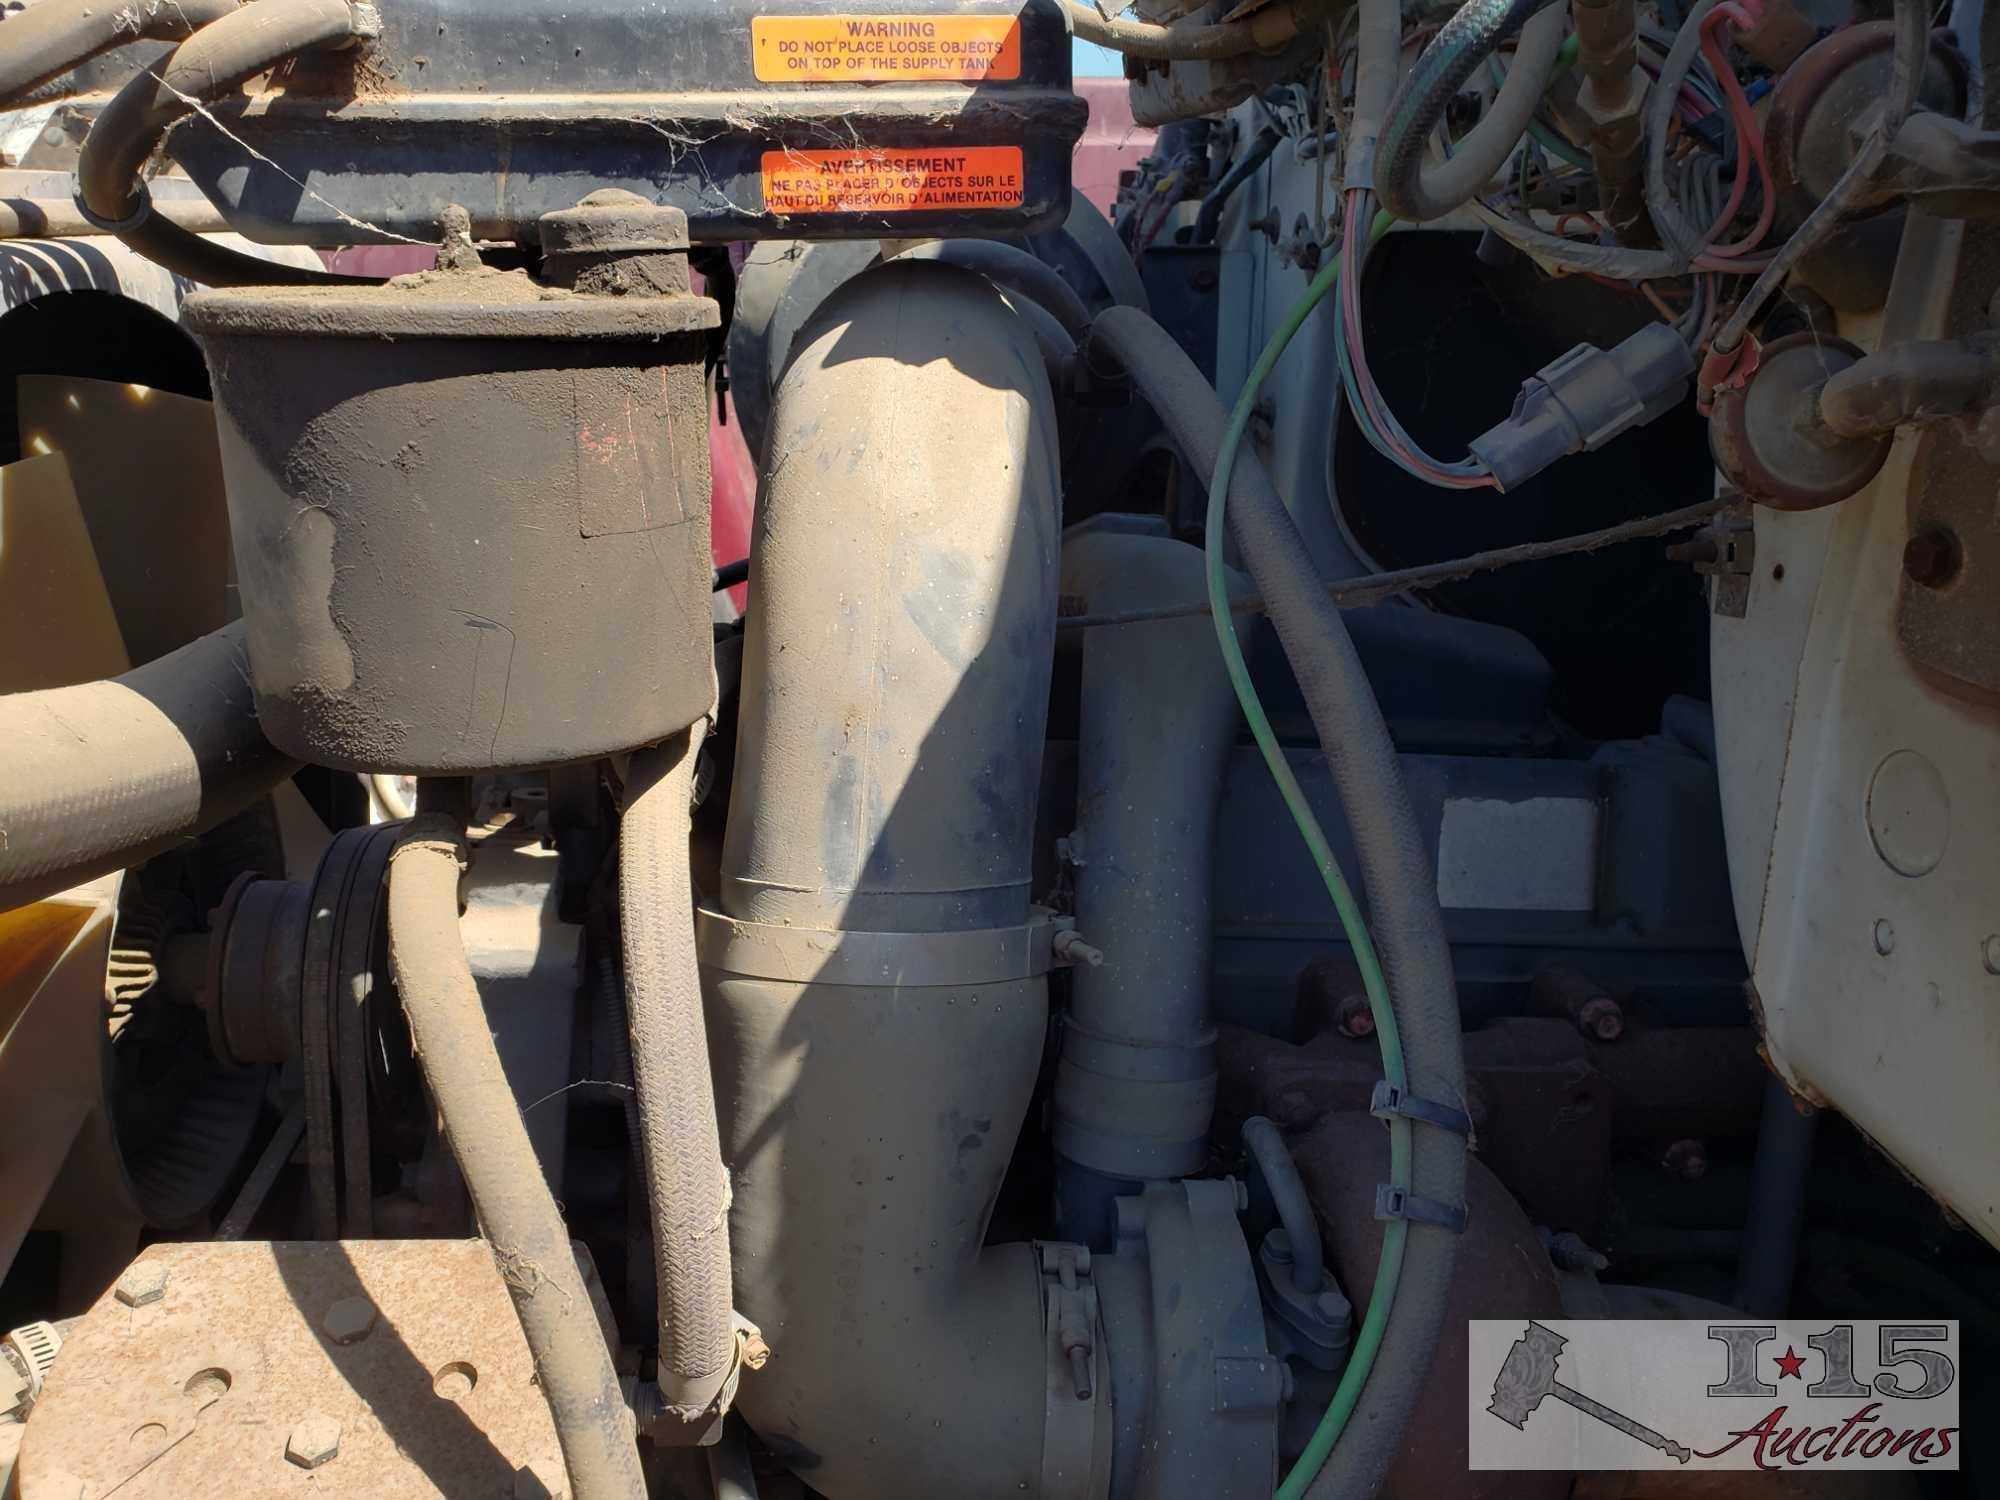 1990 Ford L8000 Water Truck (Watch Video ) Tank not rusted out!